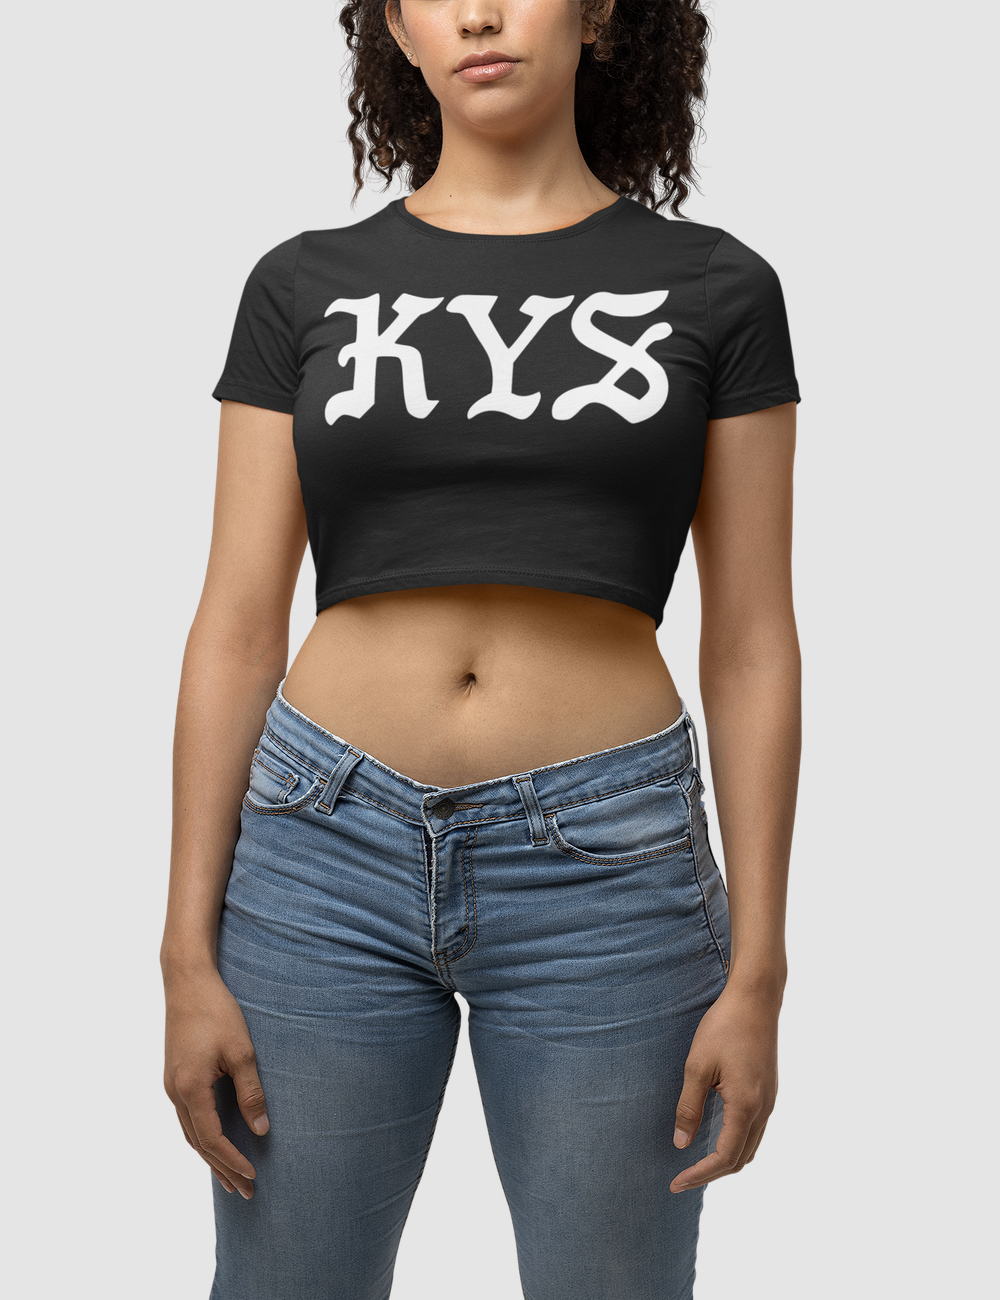 KYS Women's Fitted Crop Top T-Shirt OniTakai